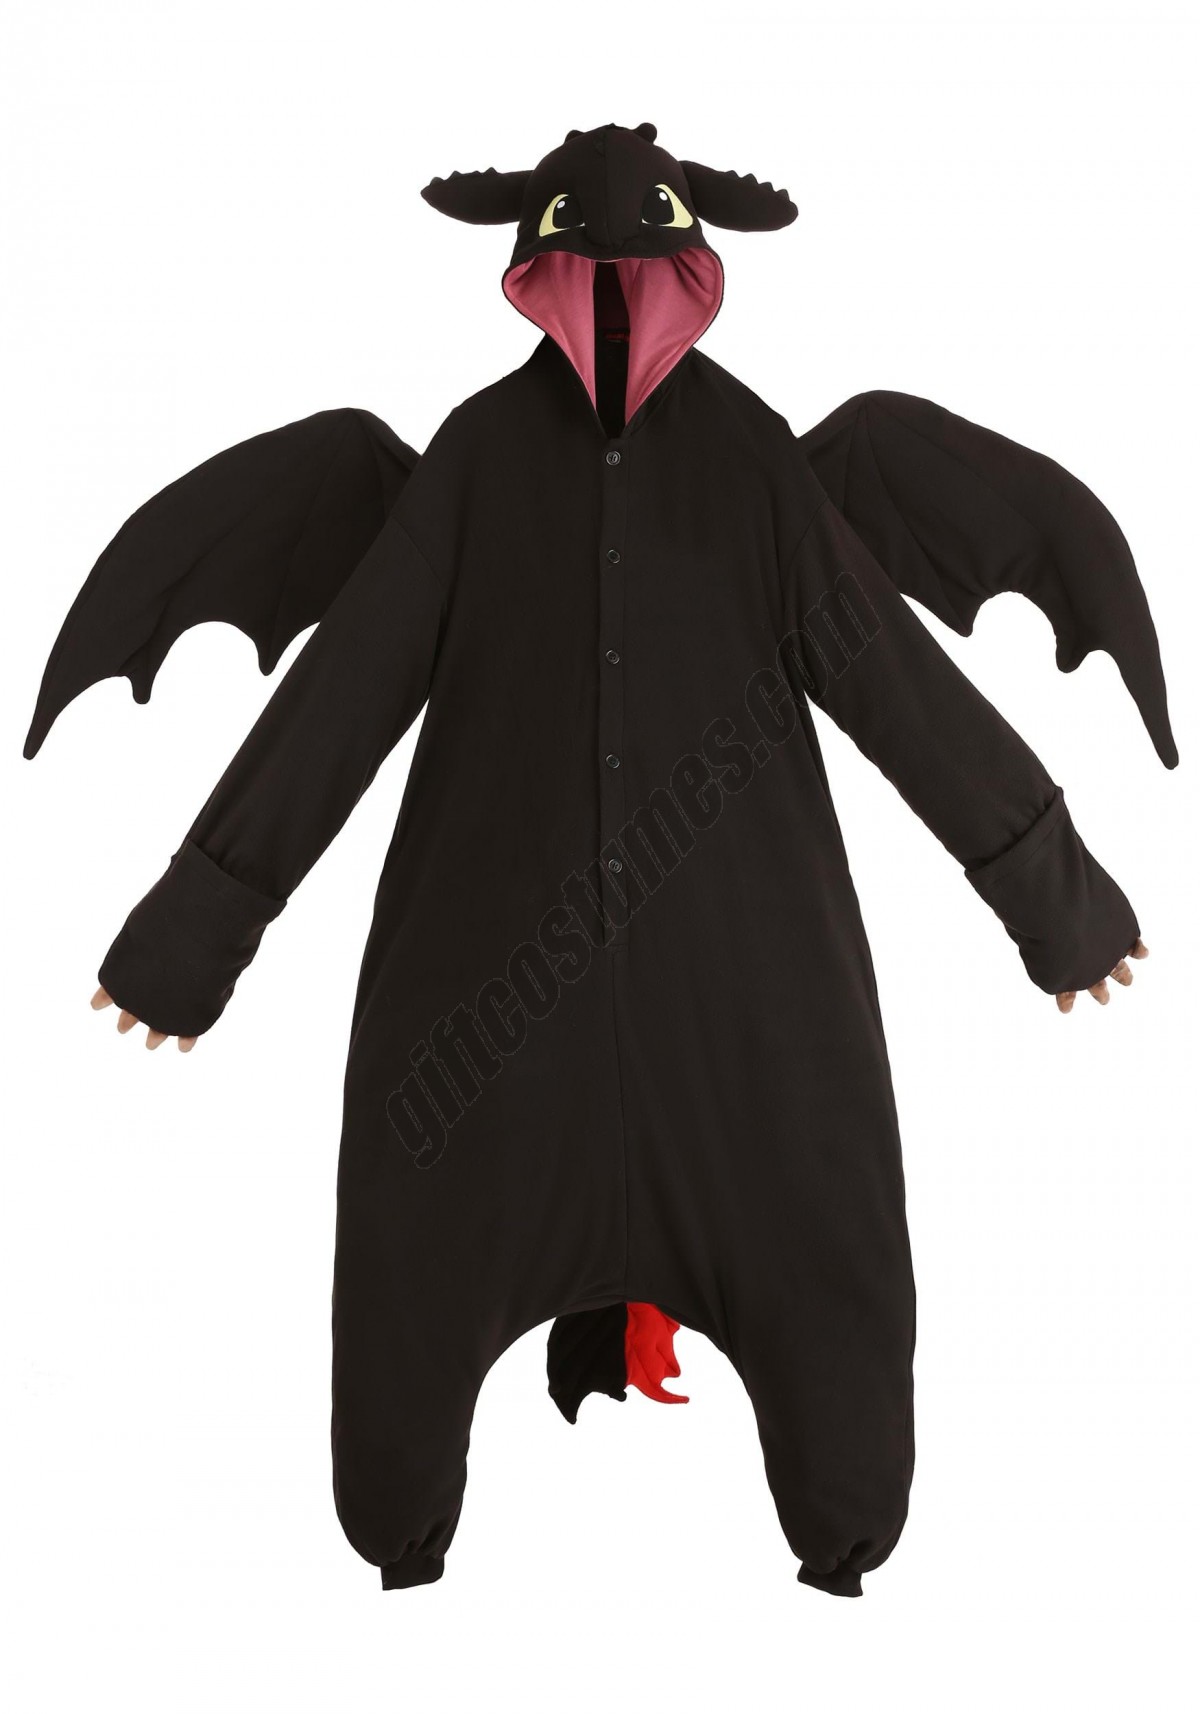 How to Train Your Dragon Toothless Adult Kigurumi Costume - Men's - -9